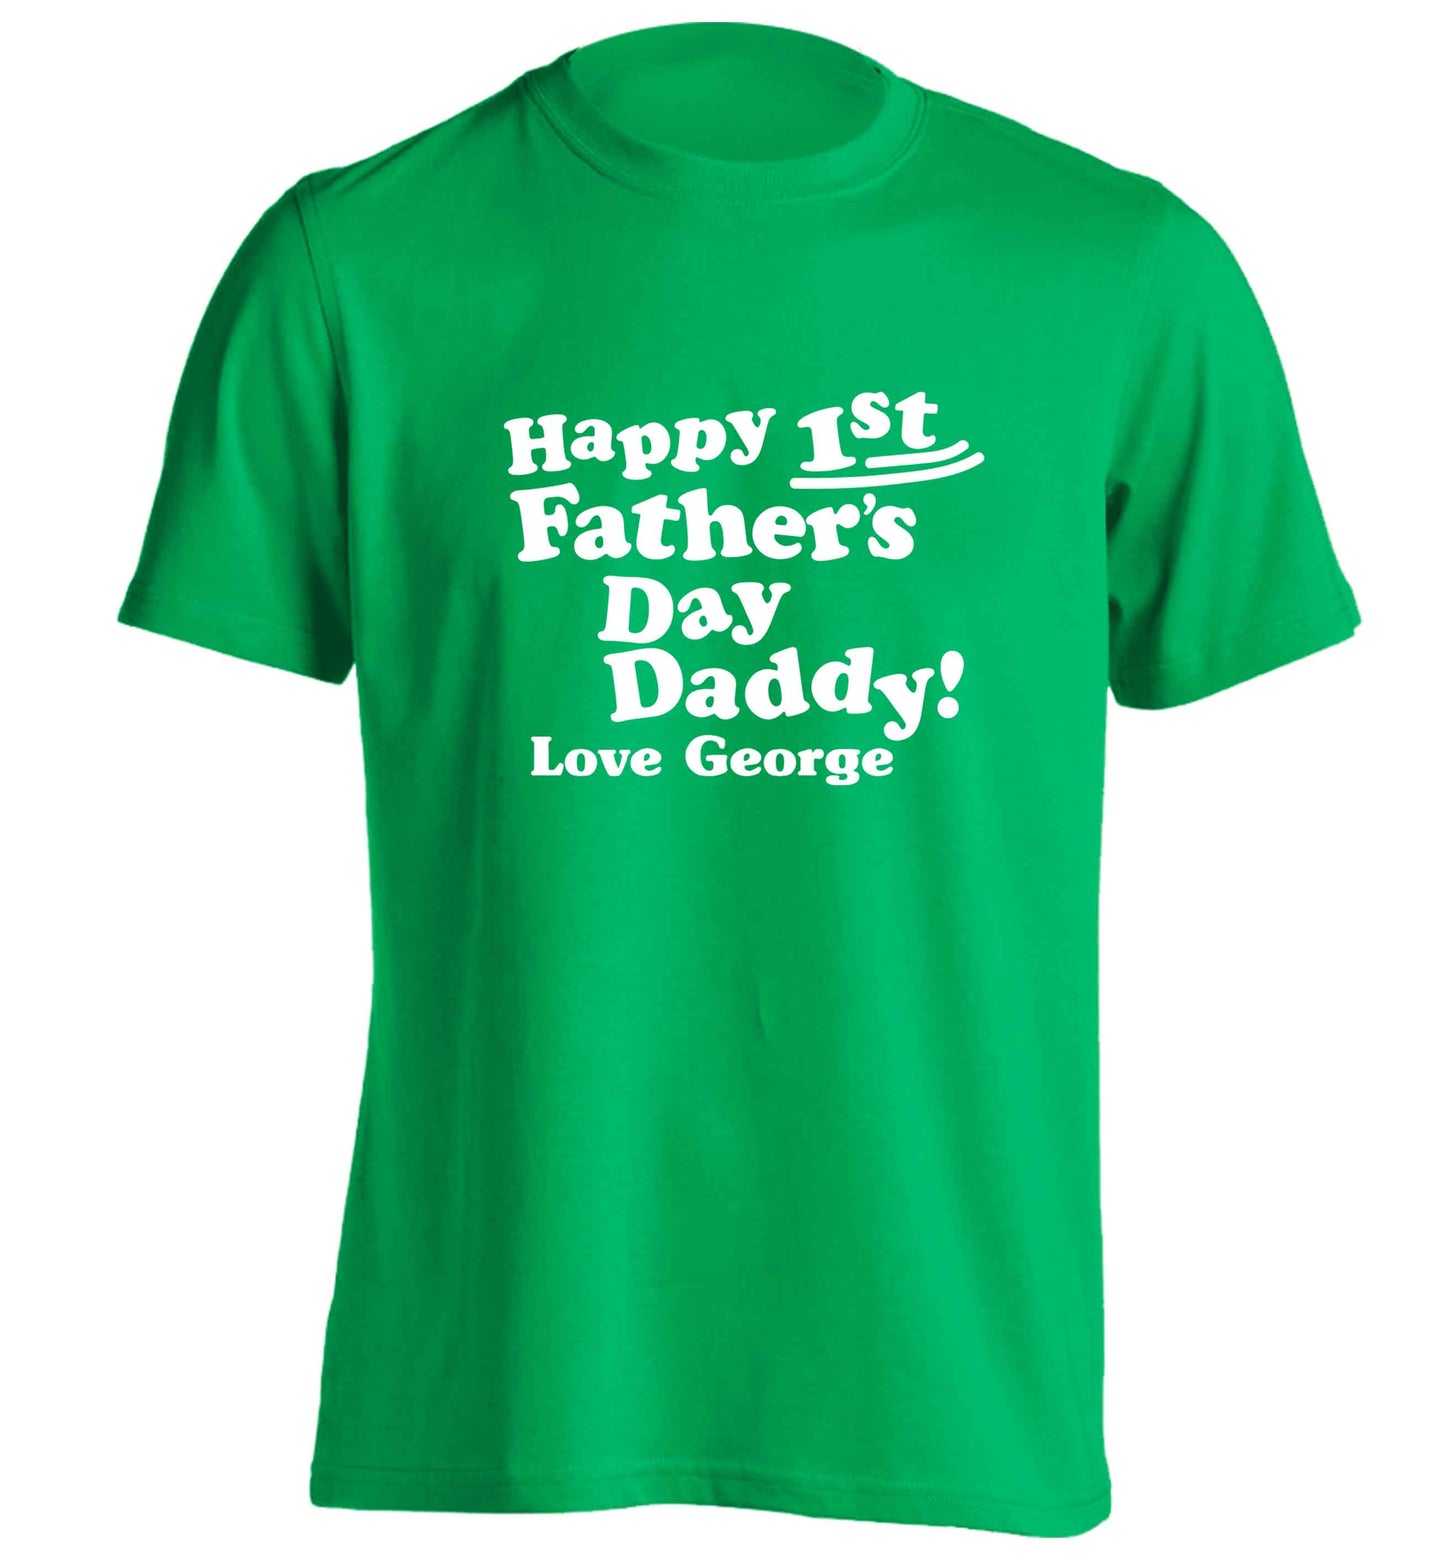 Happy first Fathers Day daddy love personalised adults unisex green Tshirt 2XL